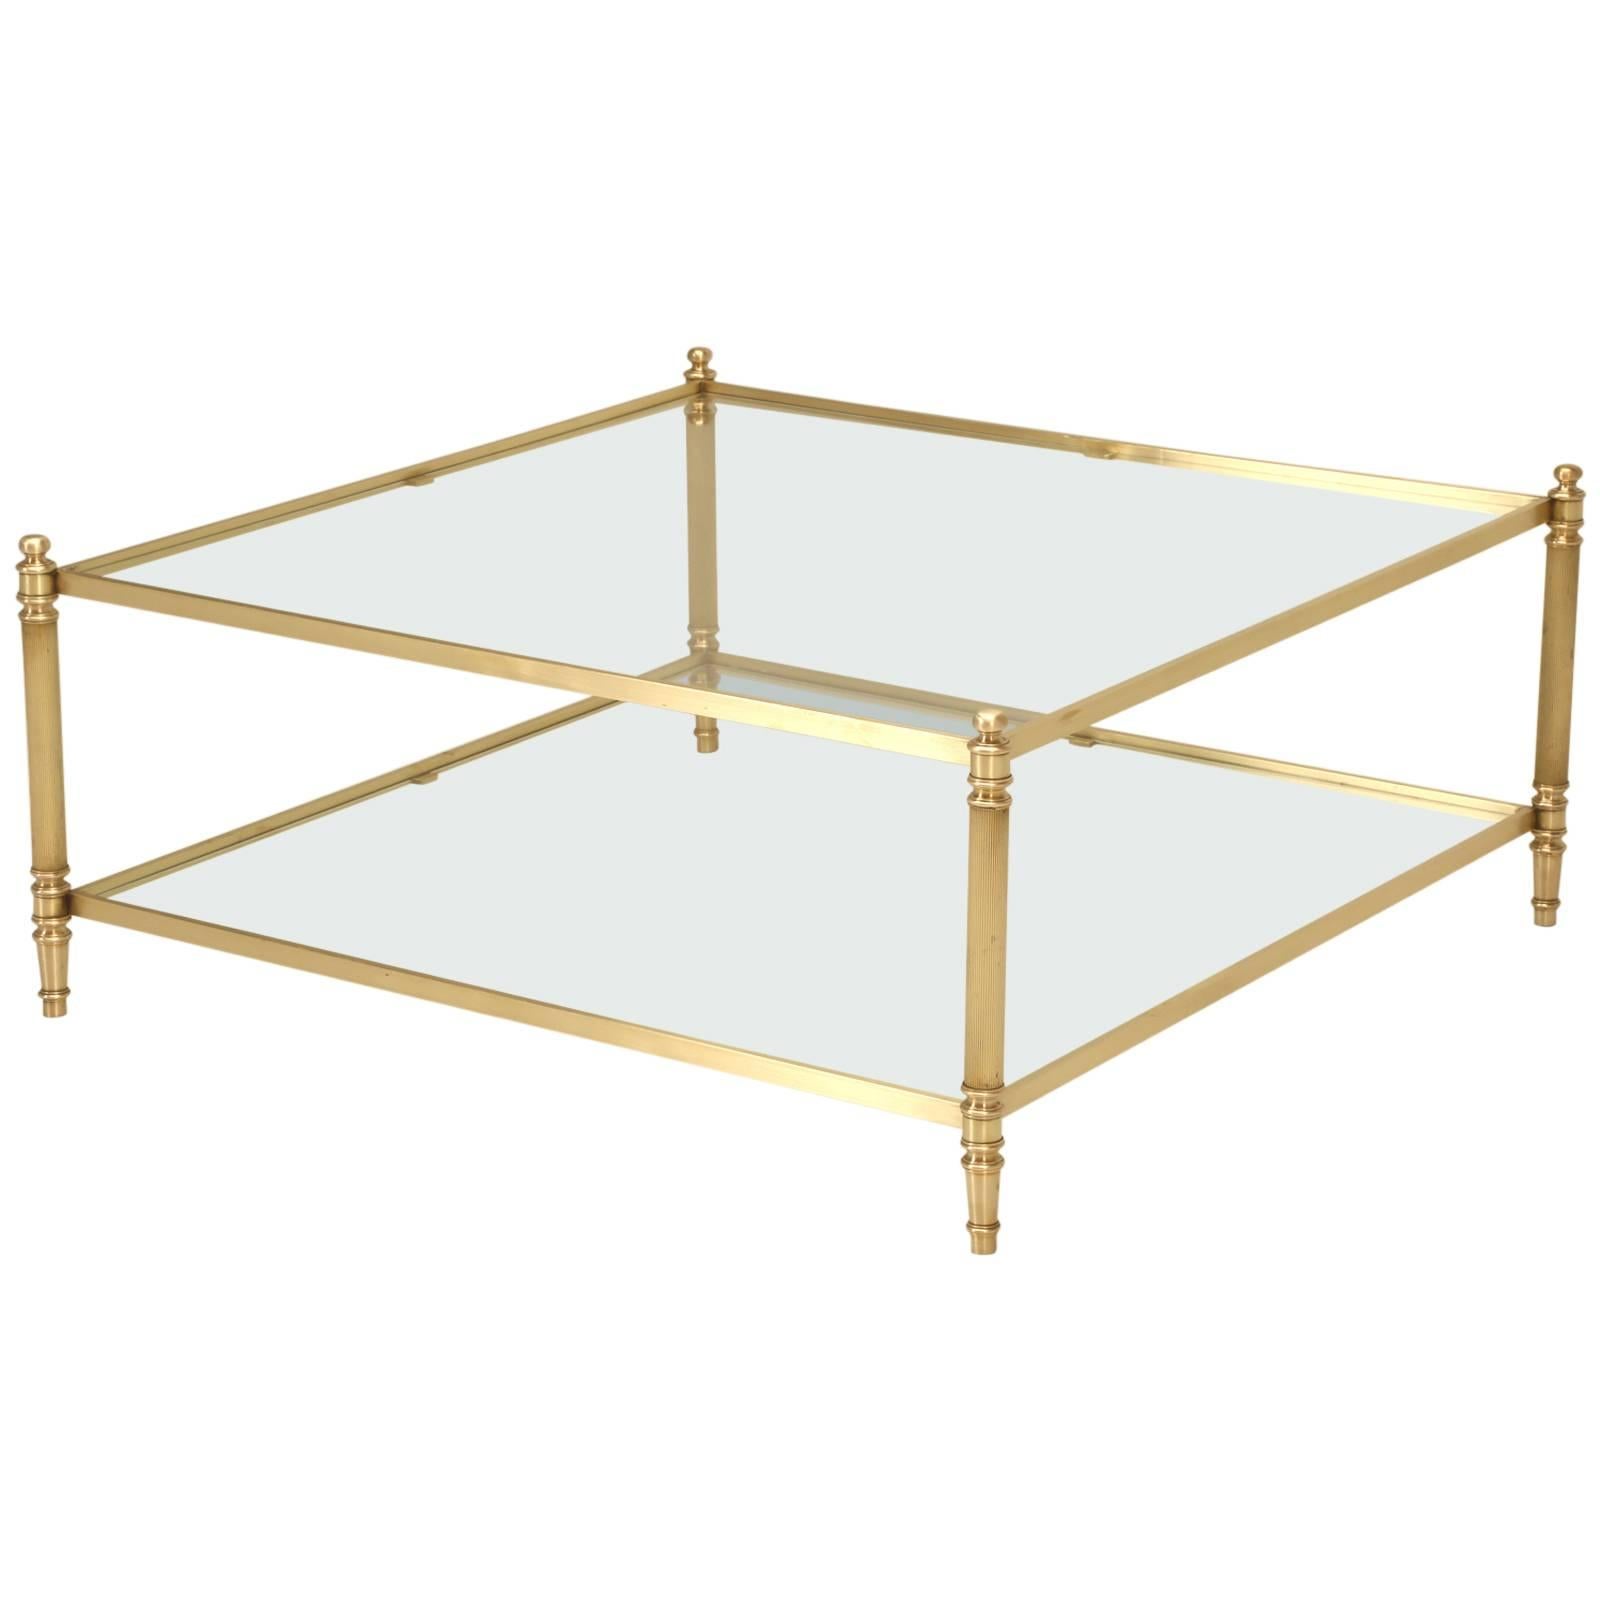 French Mid-Century Modern Brass and Glass Coffee Table